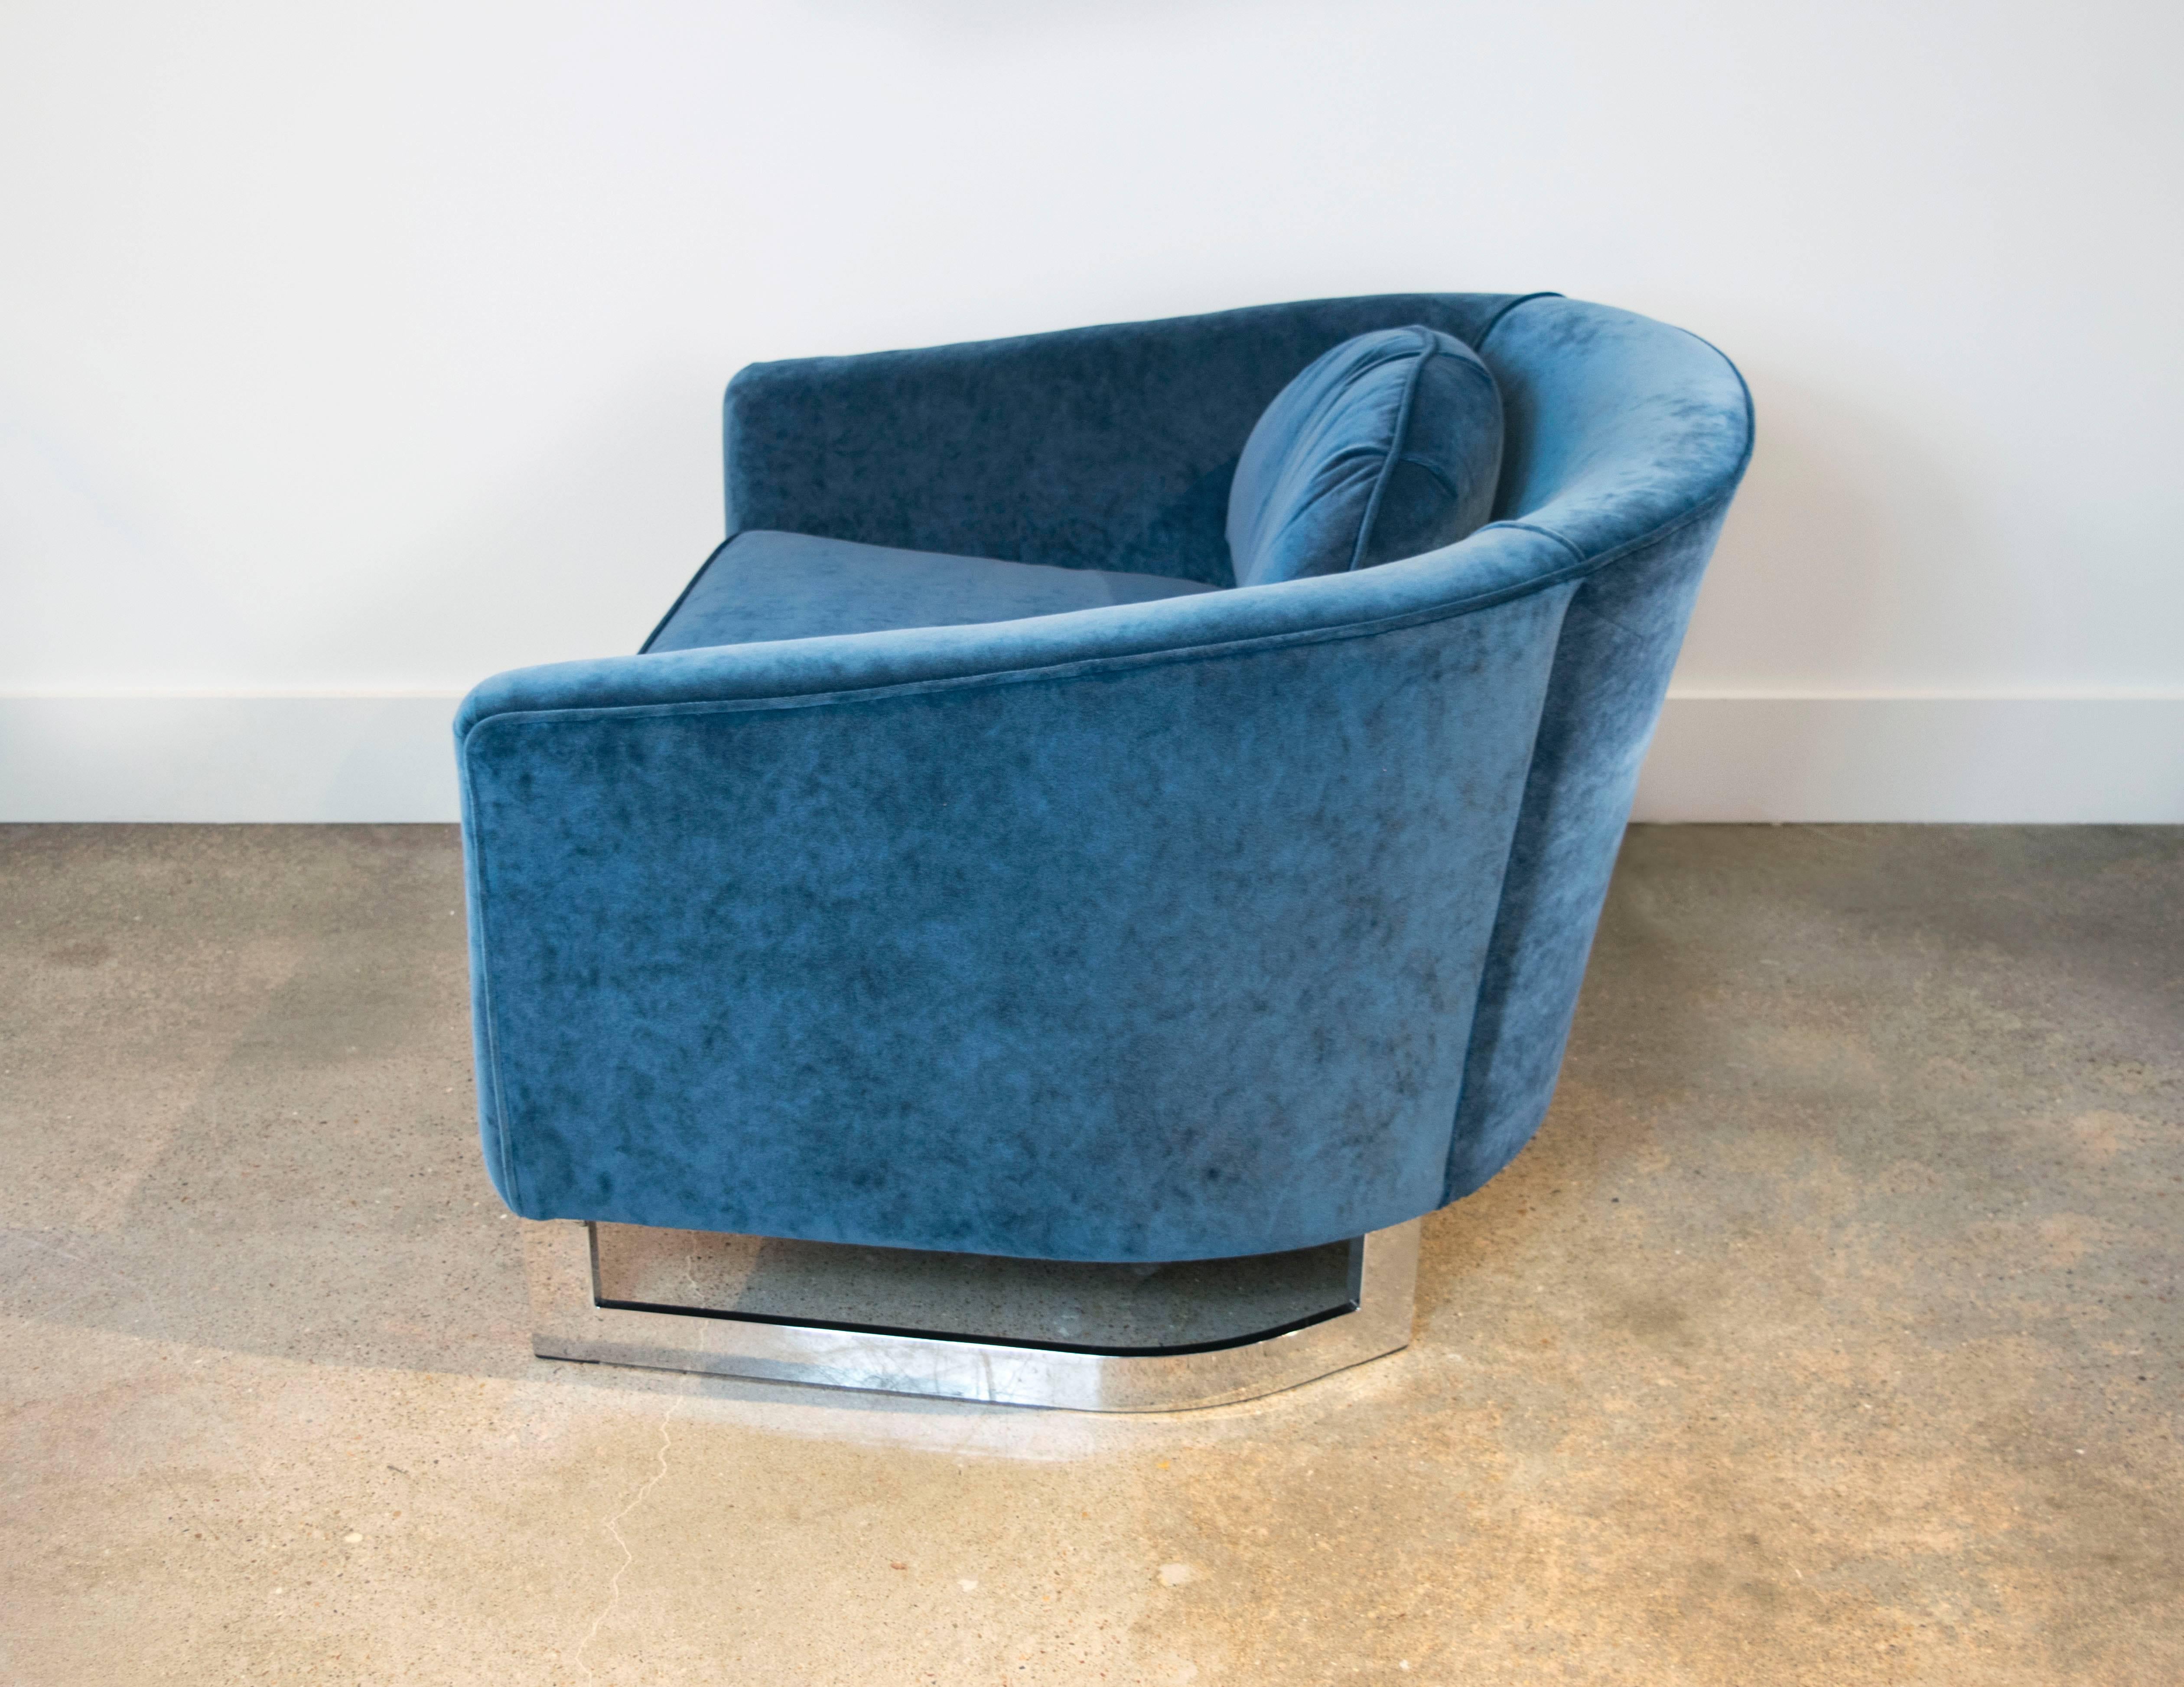 This iconic sculptural club chair by Milo Baughman has the curved back and metal base. Expertly recently reupholstered in a Prussian blue velvet.